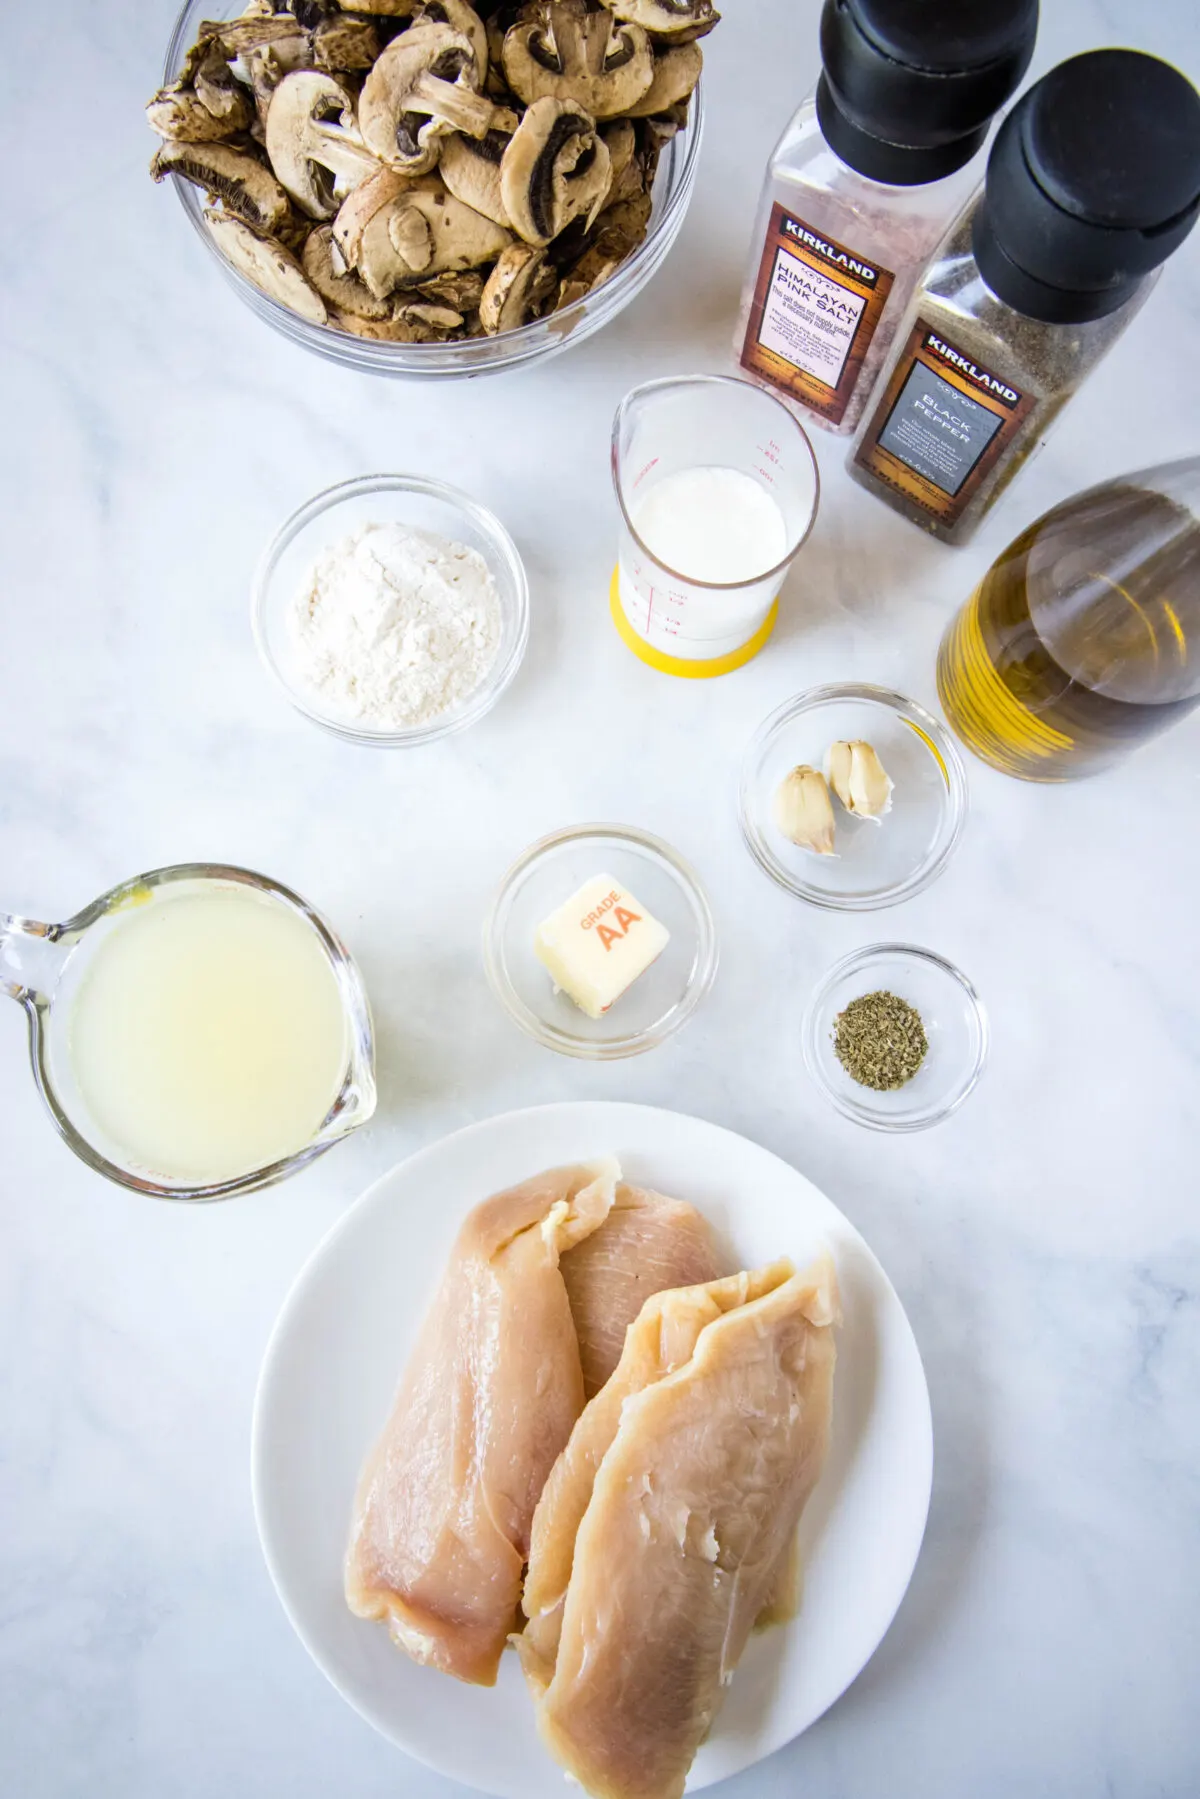 Overhead view of the ingredients needed for mushroom chicken: a plate of chicken breasts, a pyrex of chicken broth, a bowl of mushrooms, a bottle of olive oil, a glass of cream, a knob of butter, a bowl of flour, a bowl of garlic, a bowl of Italian seasoning, and salt and pepper grinders